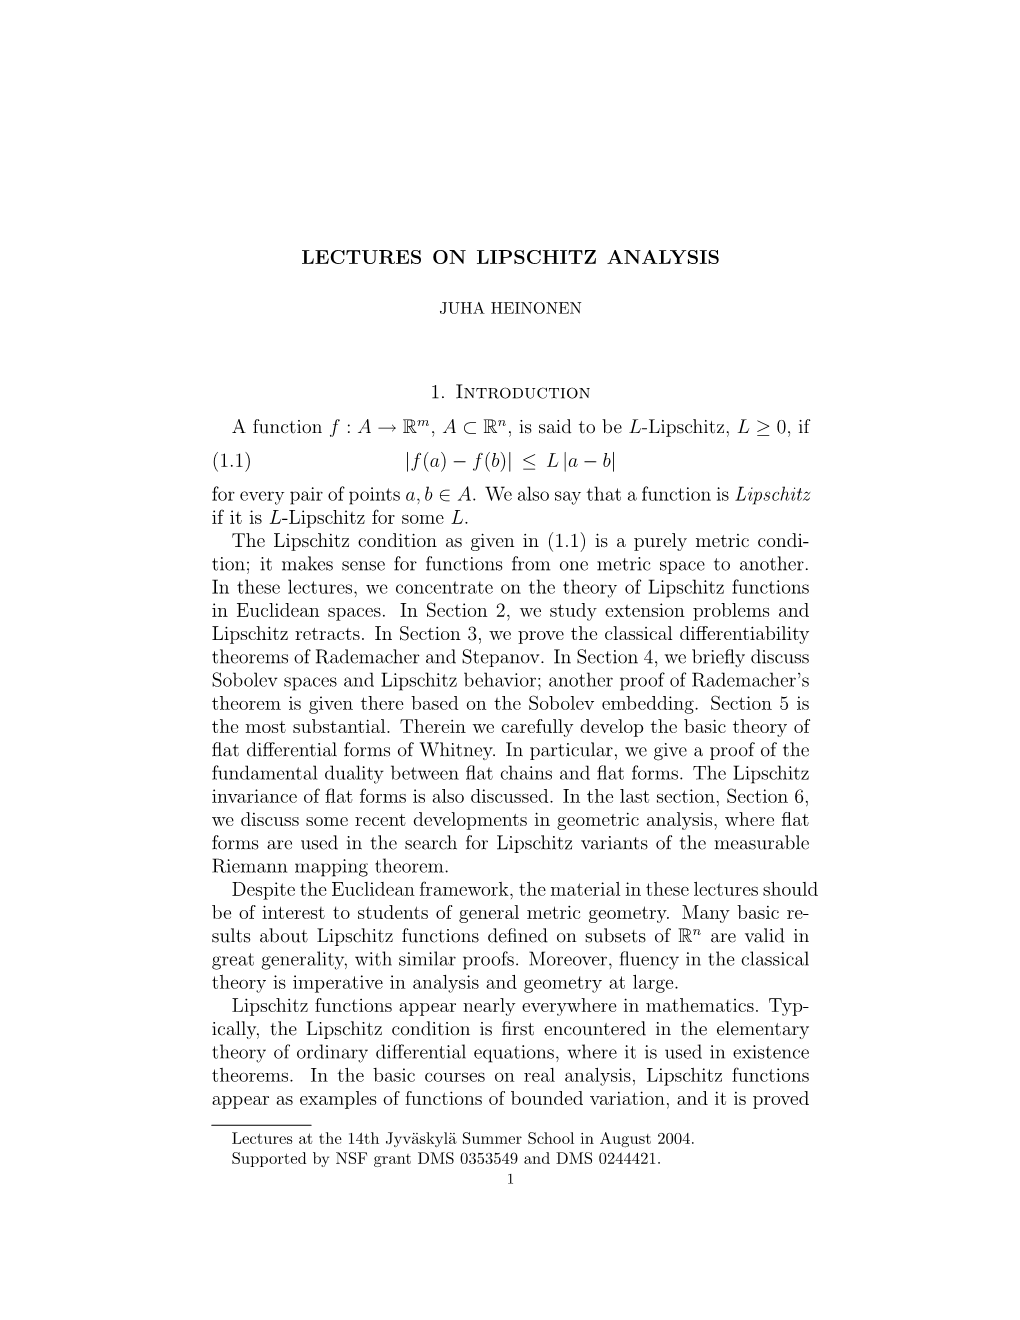 LECTURES on LIPSCHITZ ANALYSIS 1. Introduction a Function F